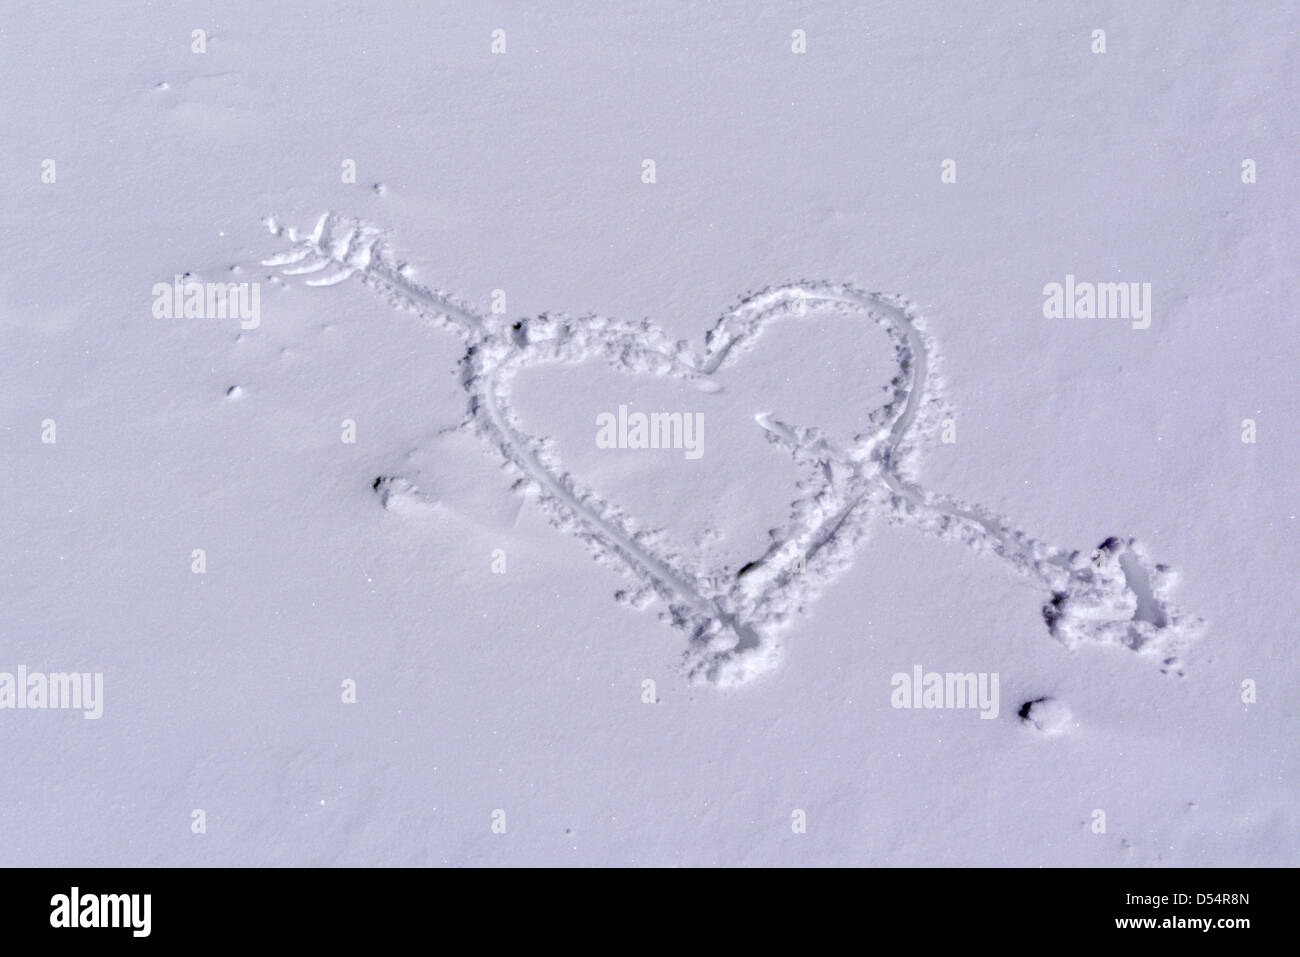 Love hearts drawn in the snow Stock Photo